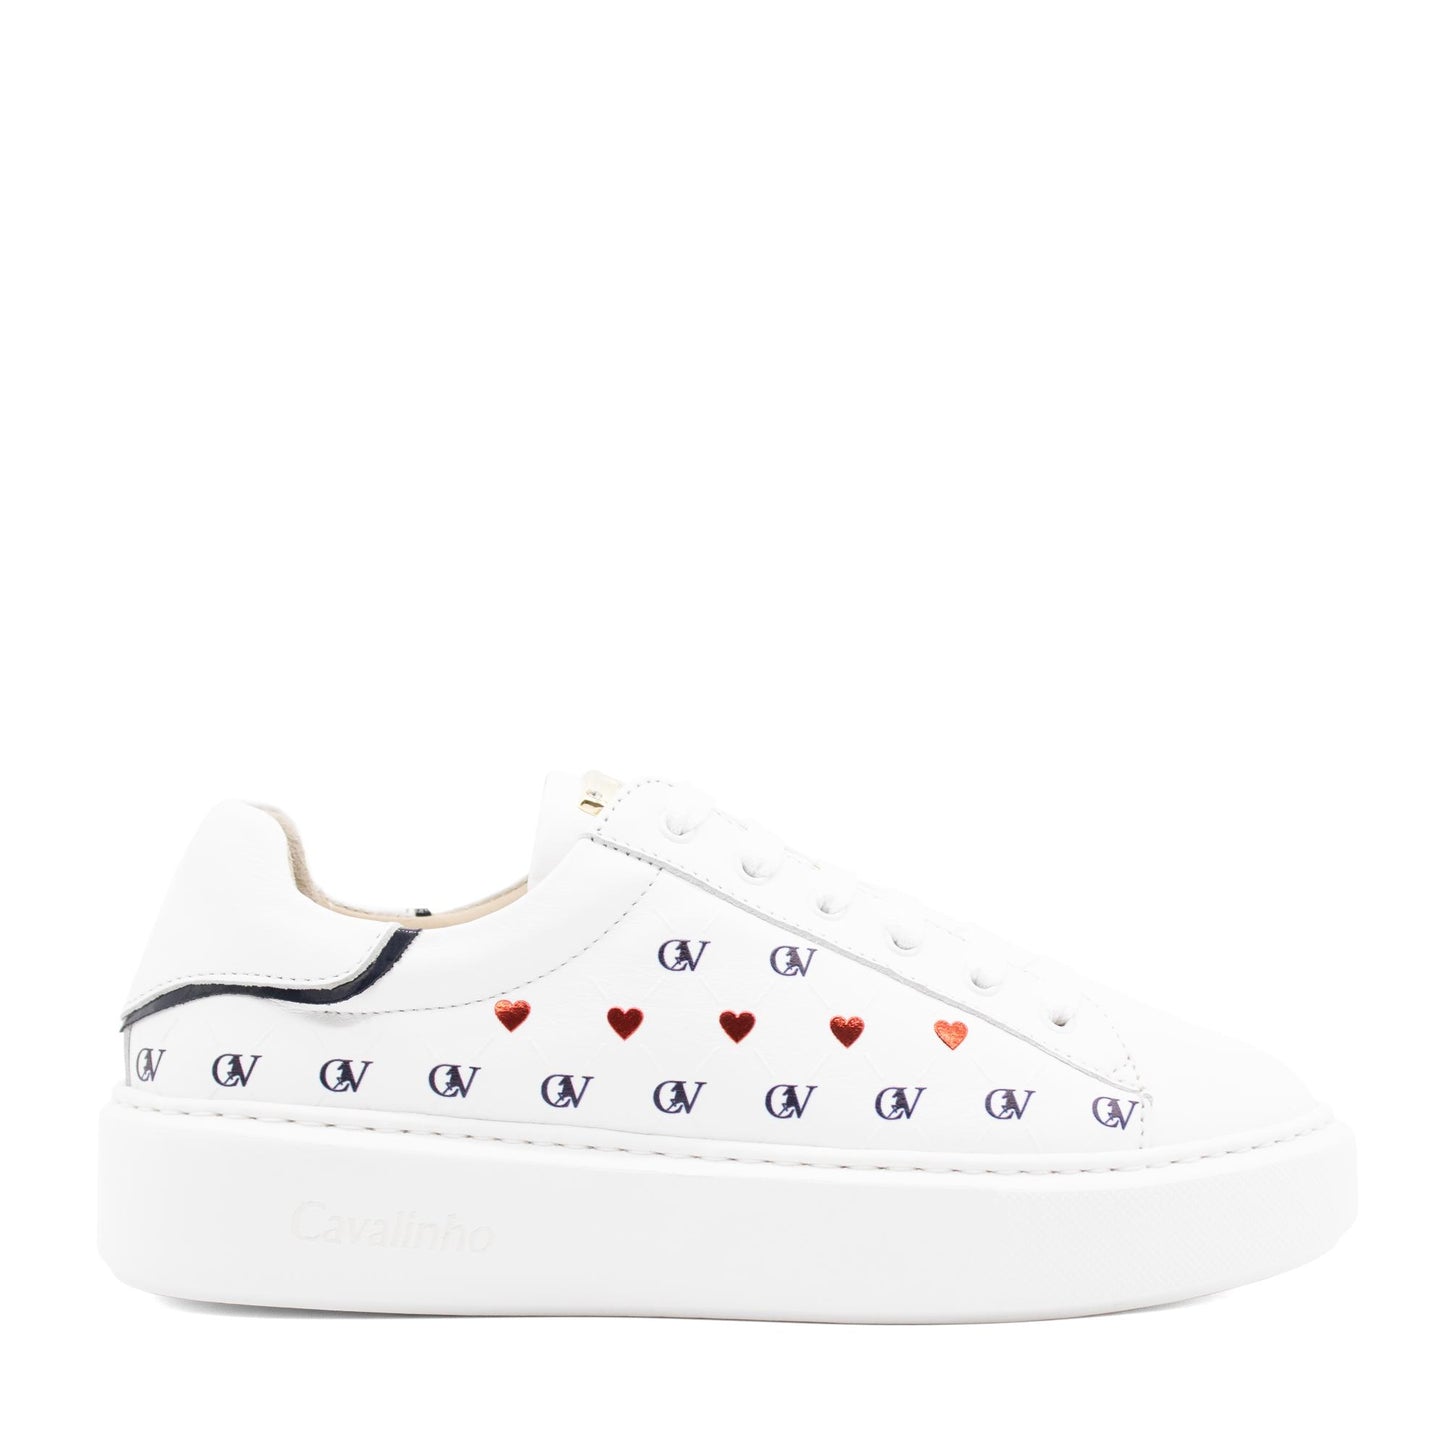 Cavalinho Love Yourself Sneakers - Navy / White / Red - 48010108.22_1